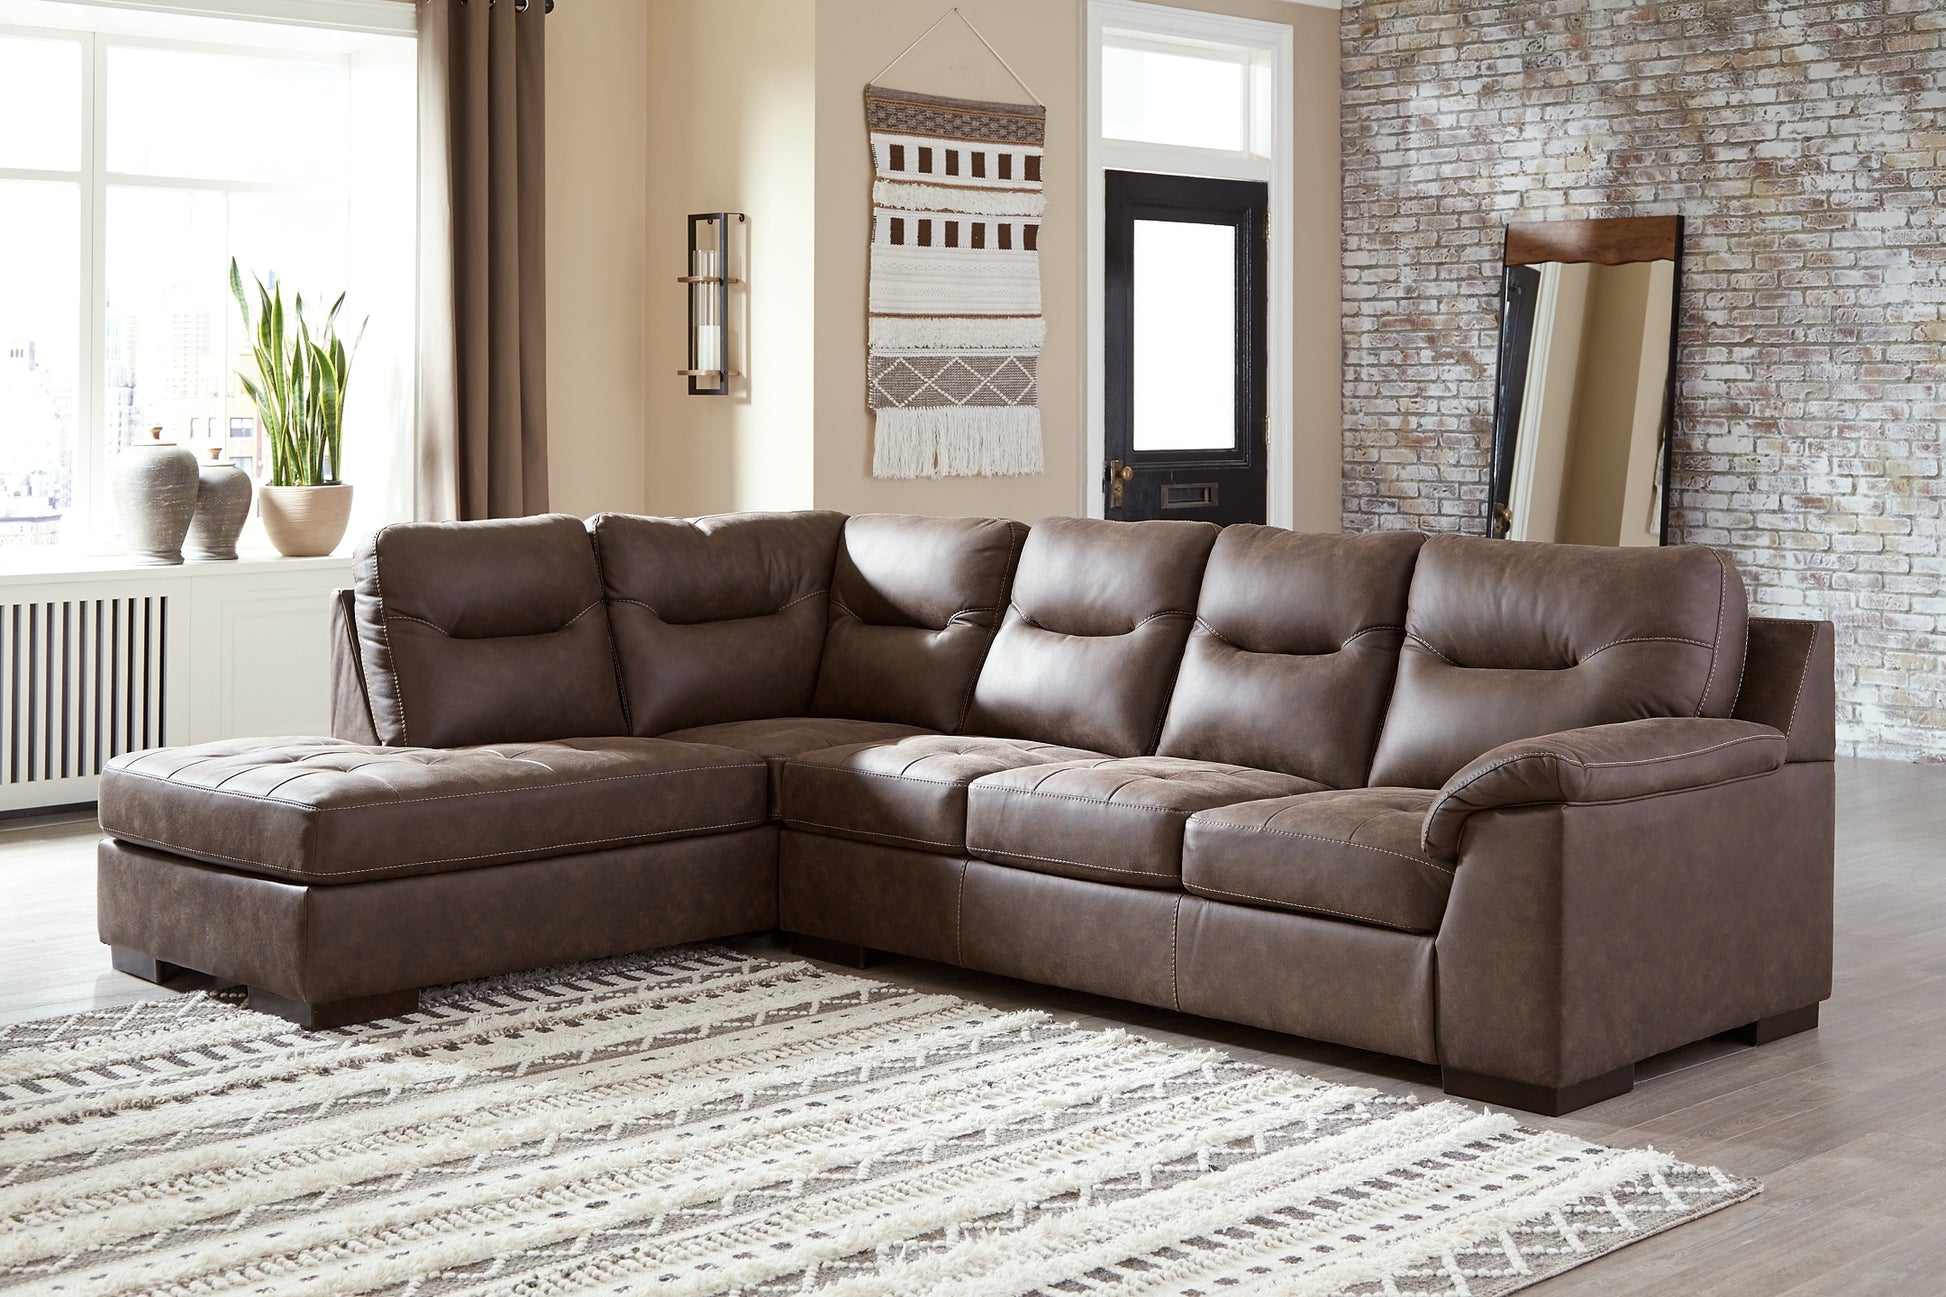 Maderla 2-Piece Sectional with Chaise Wilson Furniture (OH)  in Bridgeport, Ohio. Serving Bridgeport, Yorkville, Bellaire, & Avondale